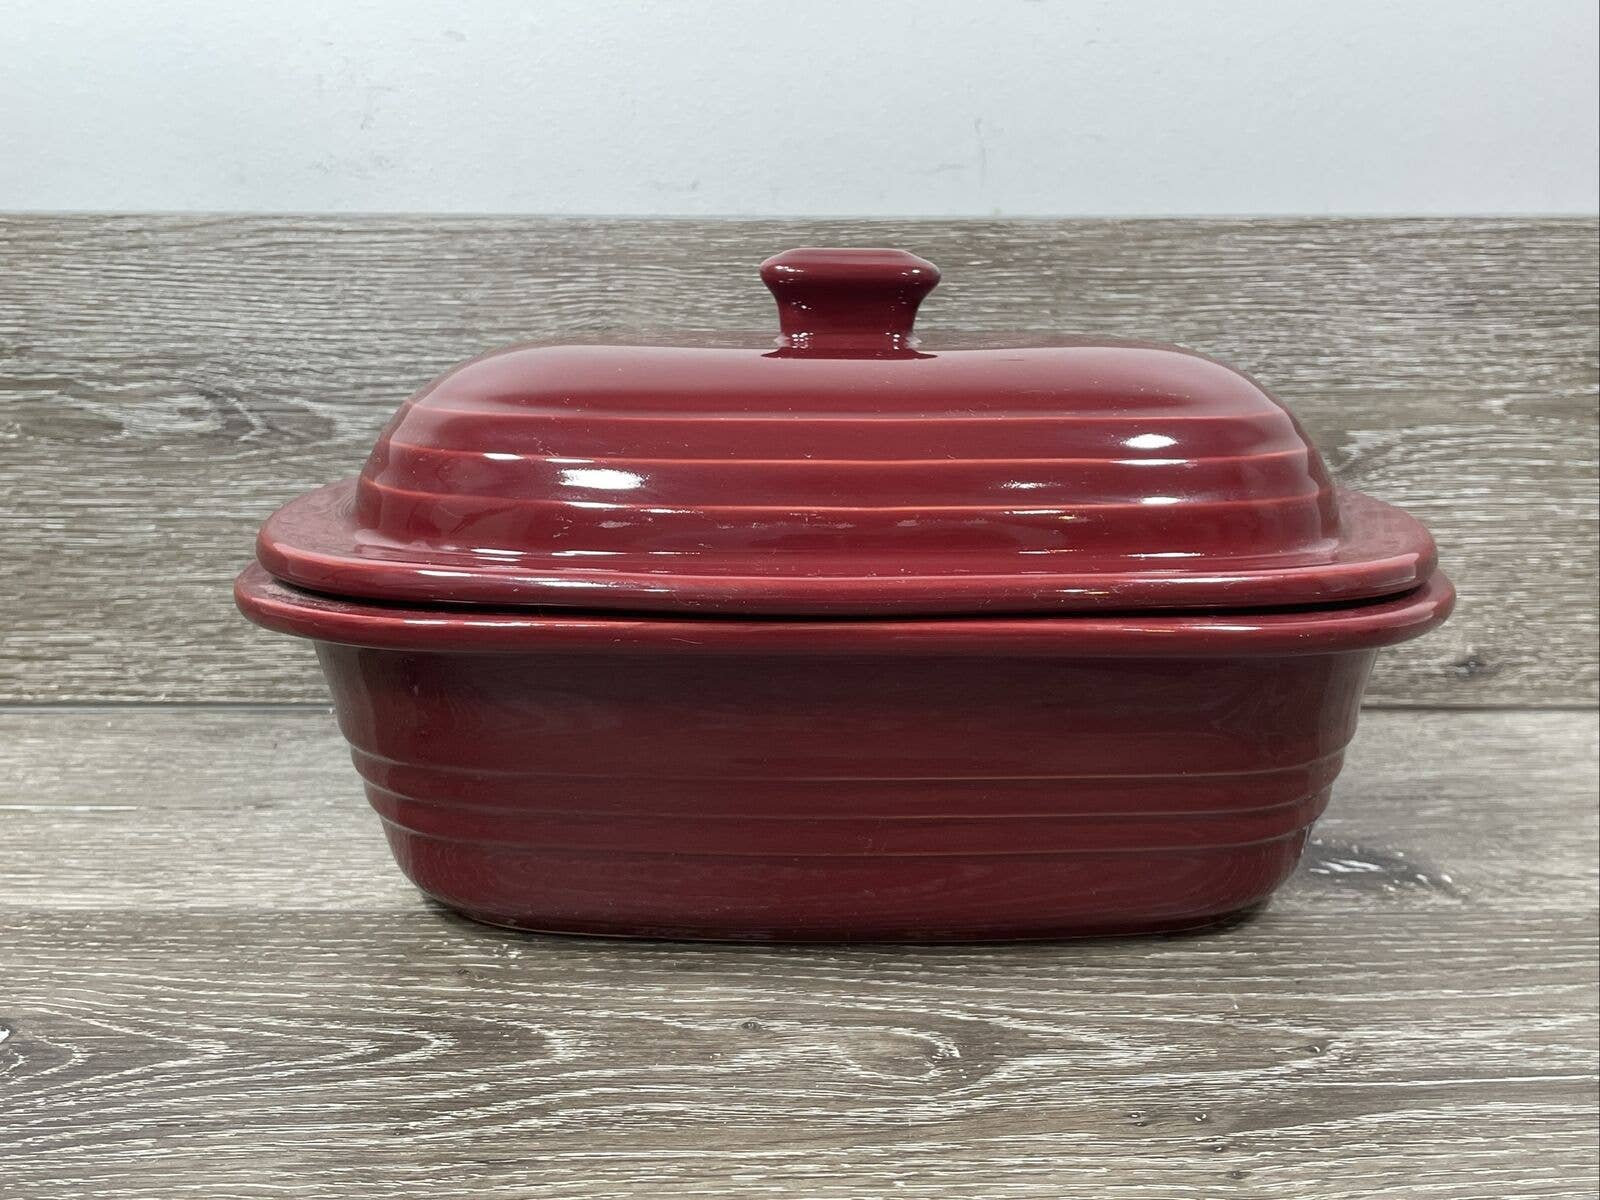 The Pampered Chef Stoneware Cranberry Red Deep Covered Oval Casserole 3.1  QT